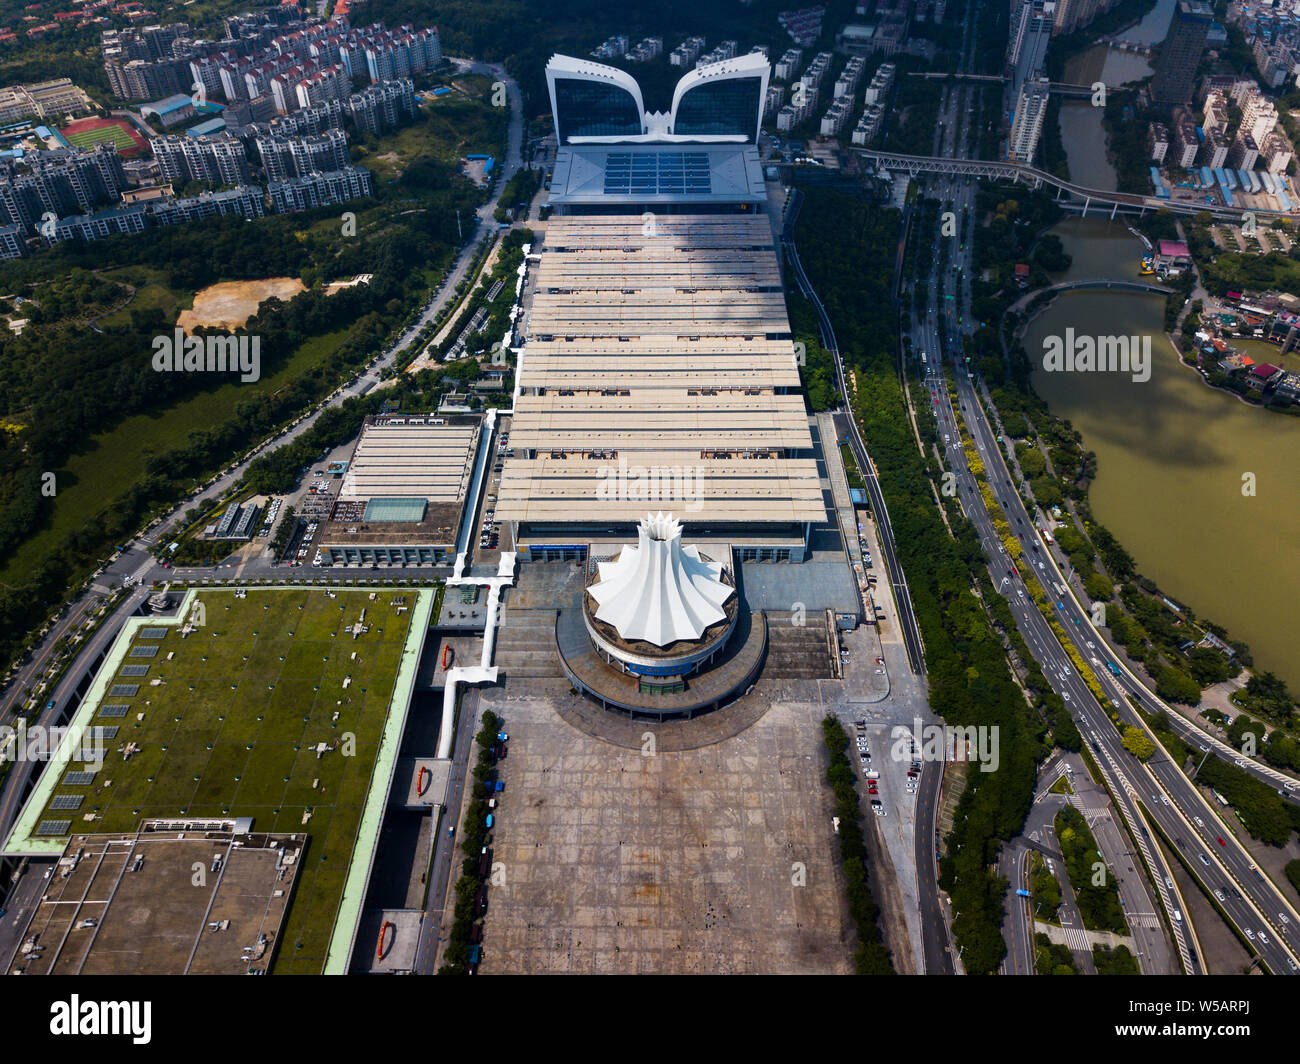 Guangxi International Convention and Exhibition Center in Nanning, capital city of Guangxi province of China Stock Photo